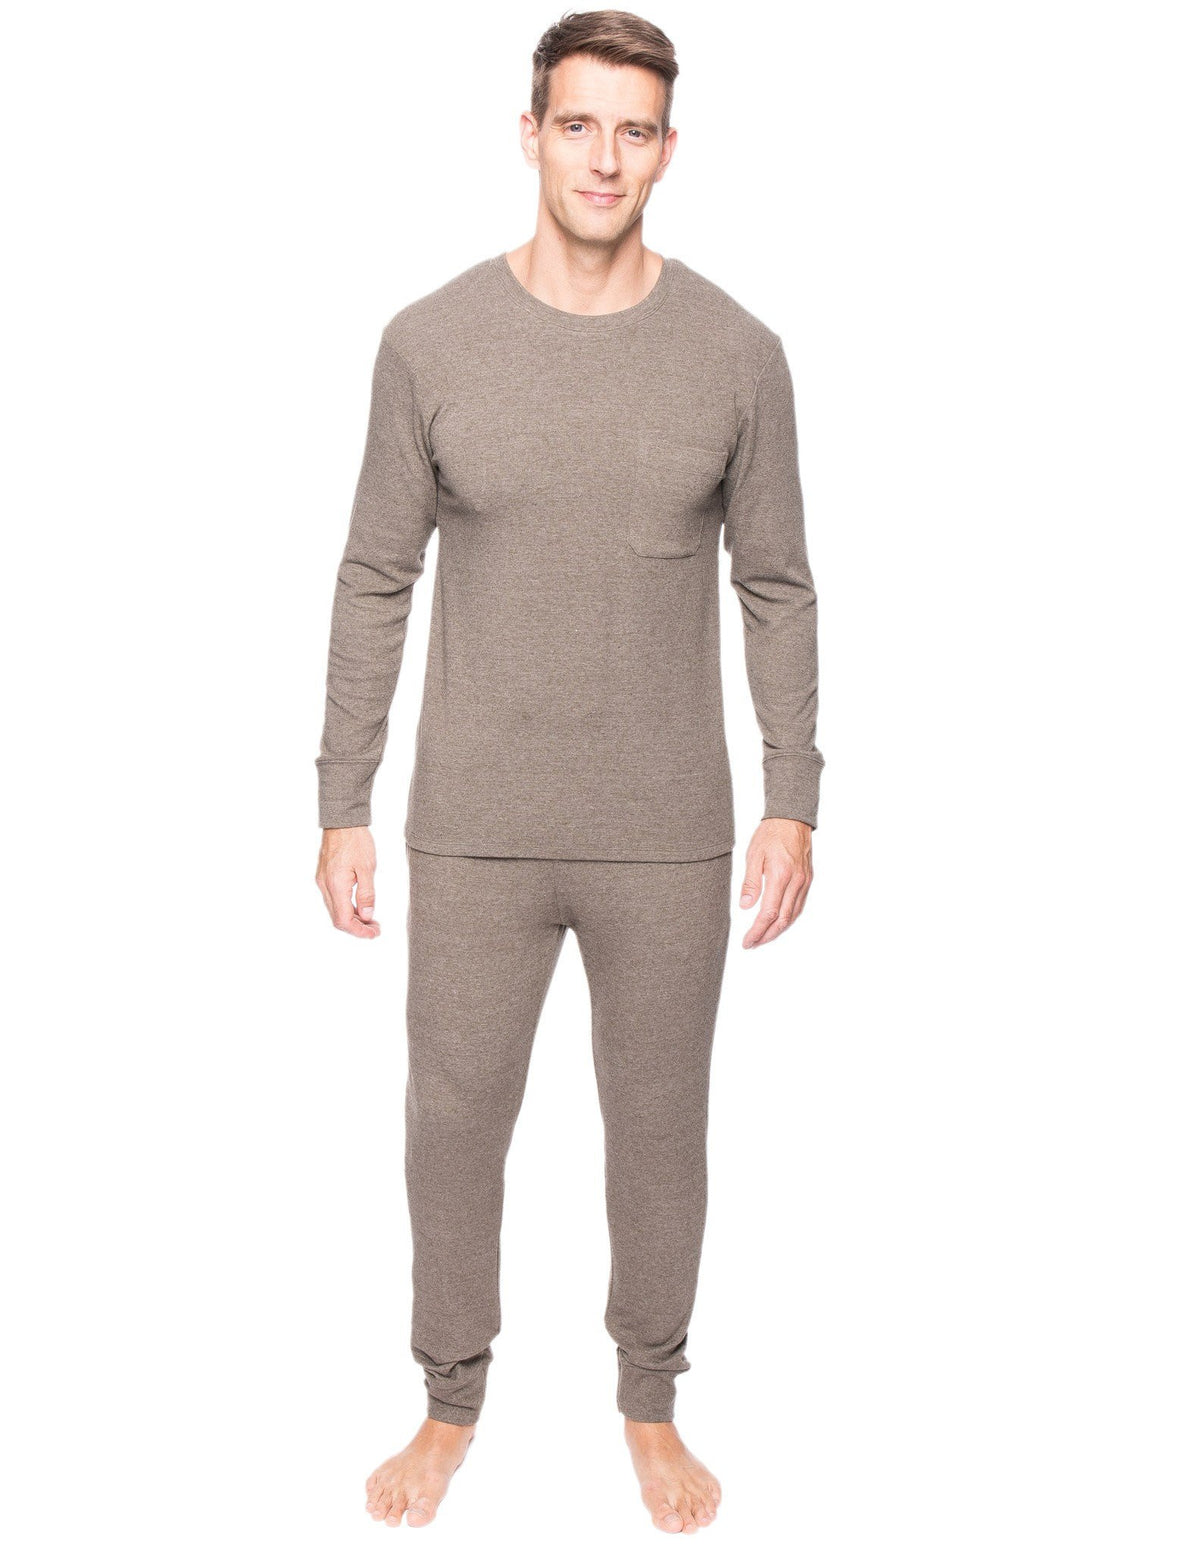 Leveret Mens Two Piece Thermal Pajamas Solid Beige Small at